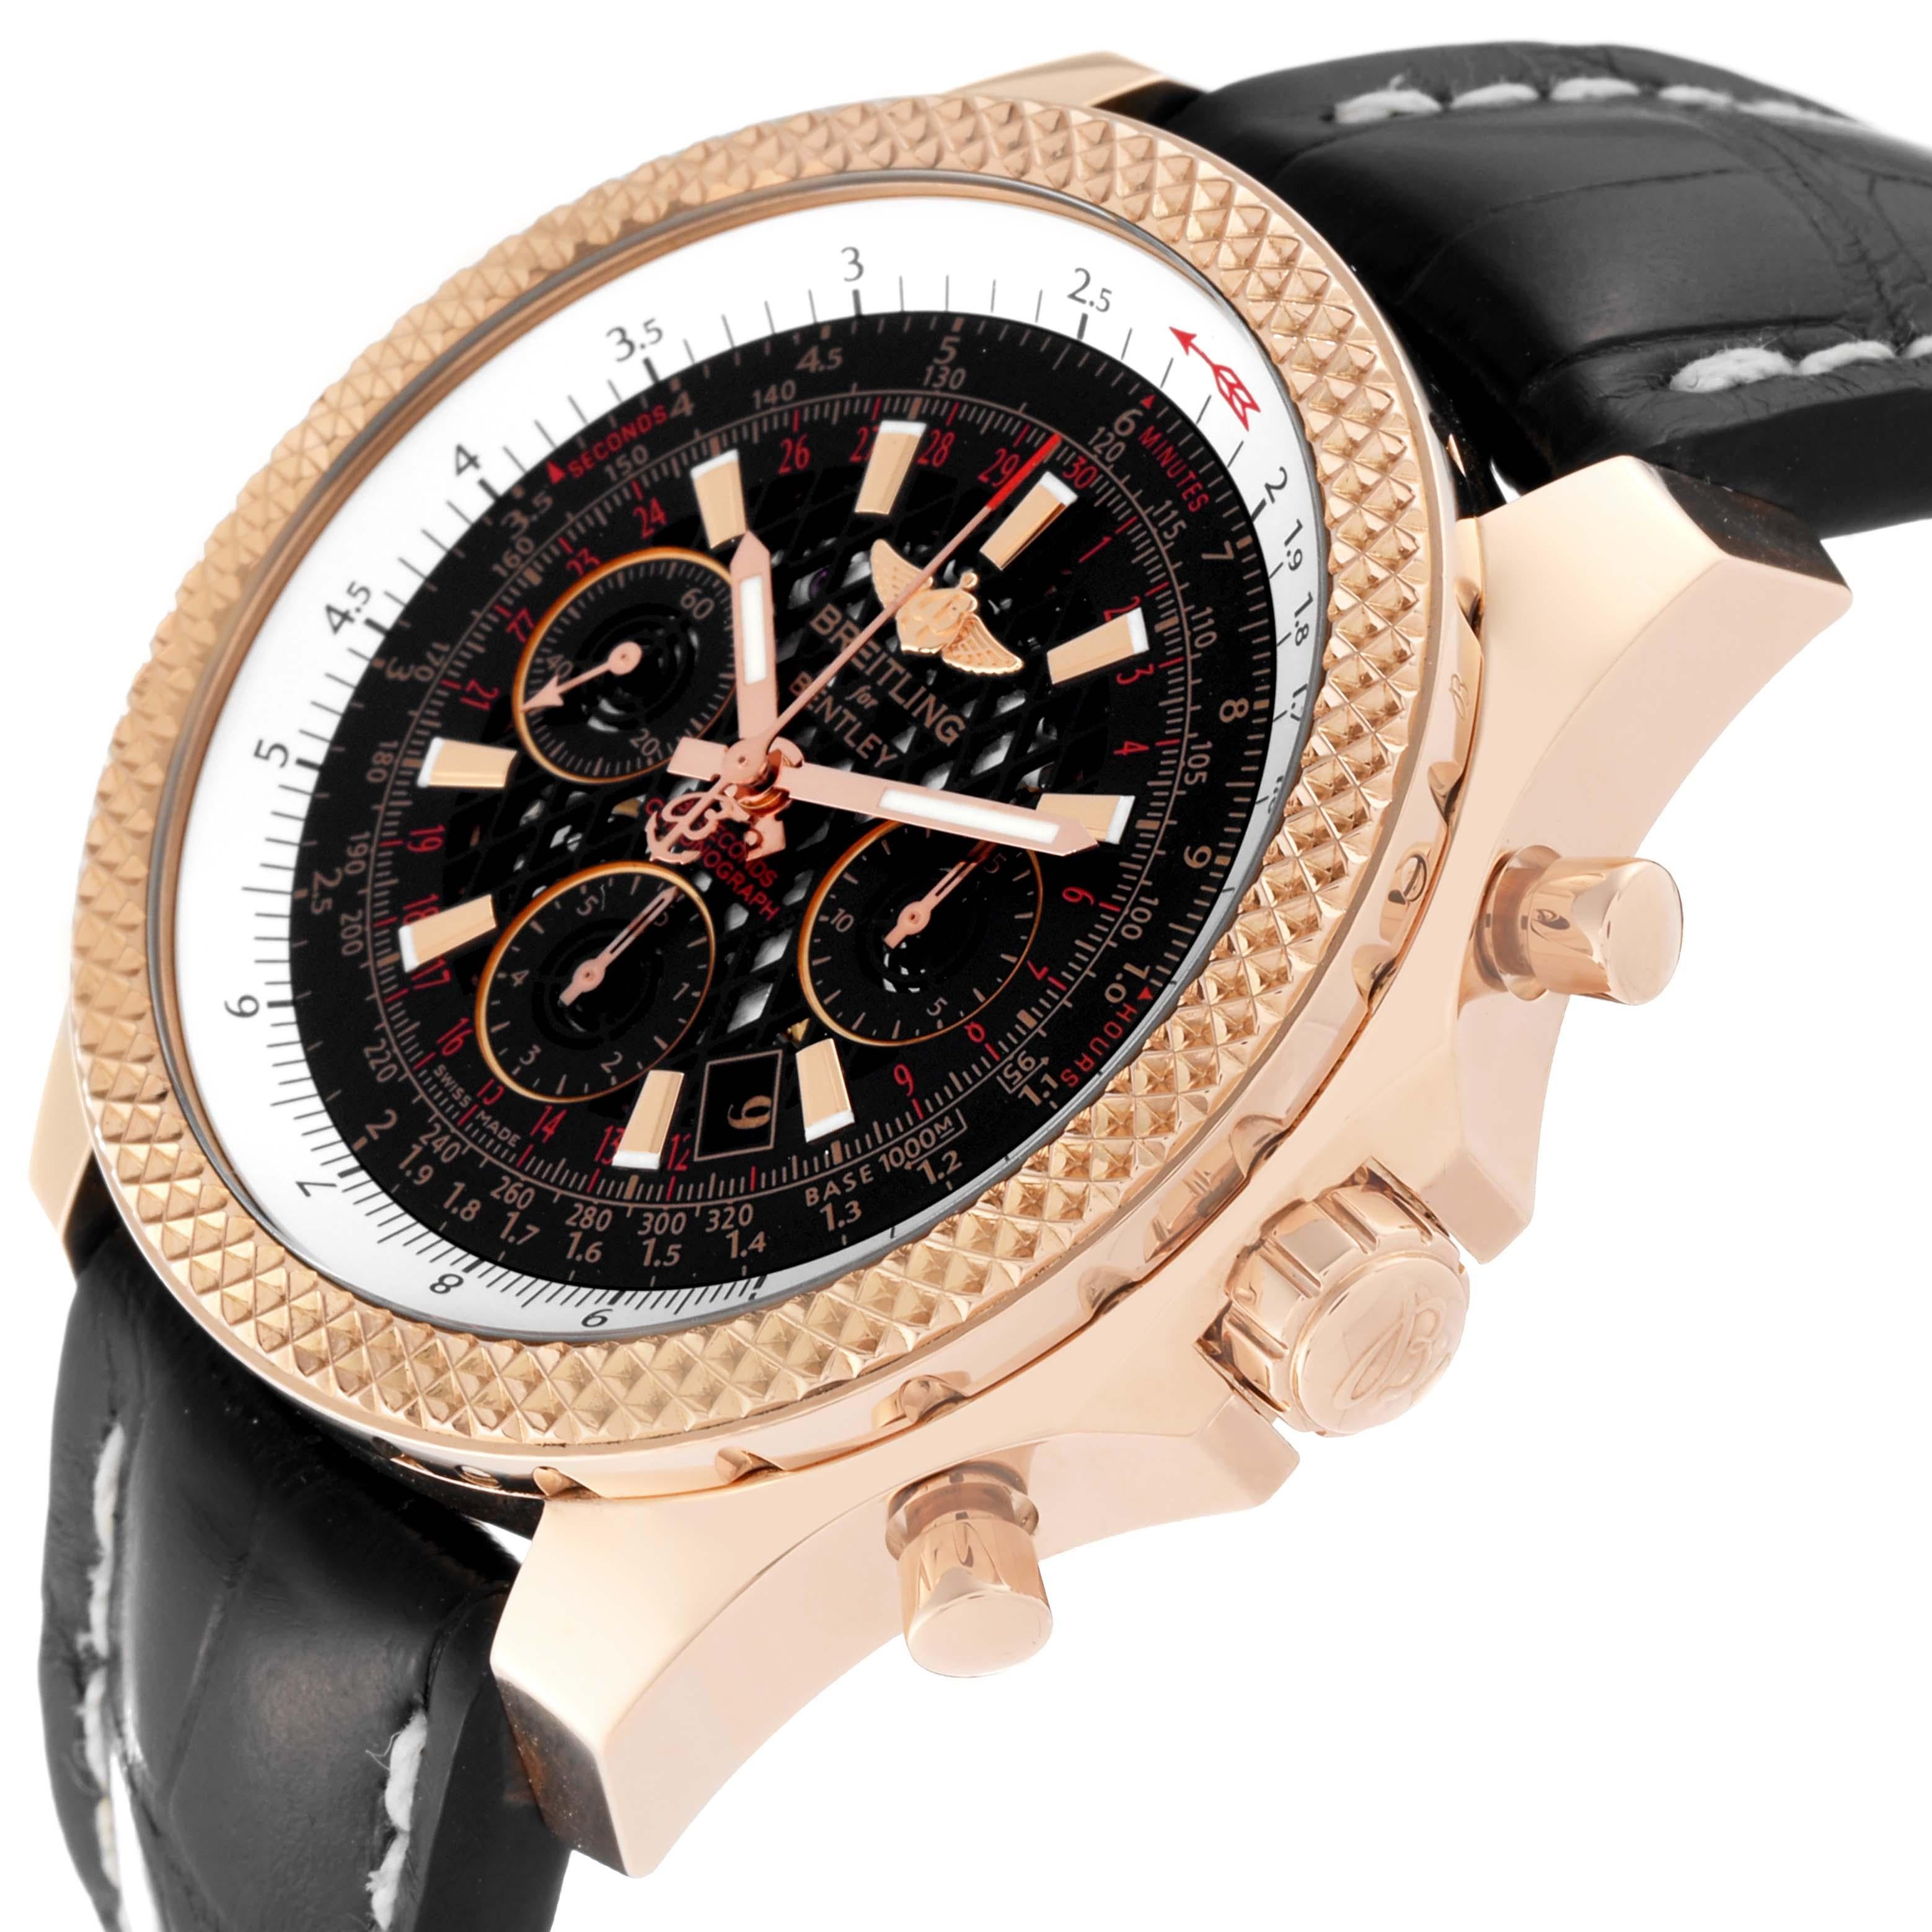 Breitling Bentley B06 Black Dial Rose Gold Mens Watch RB0611 Box Card For Sale 2